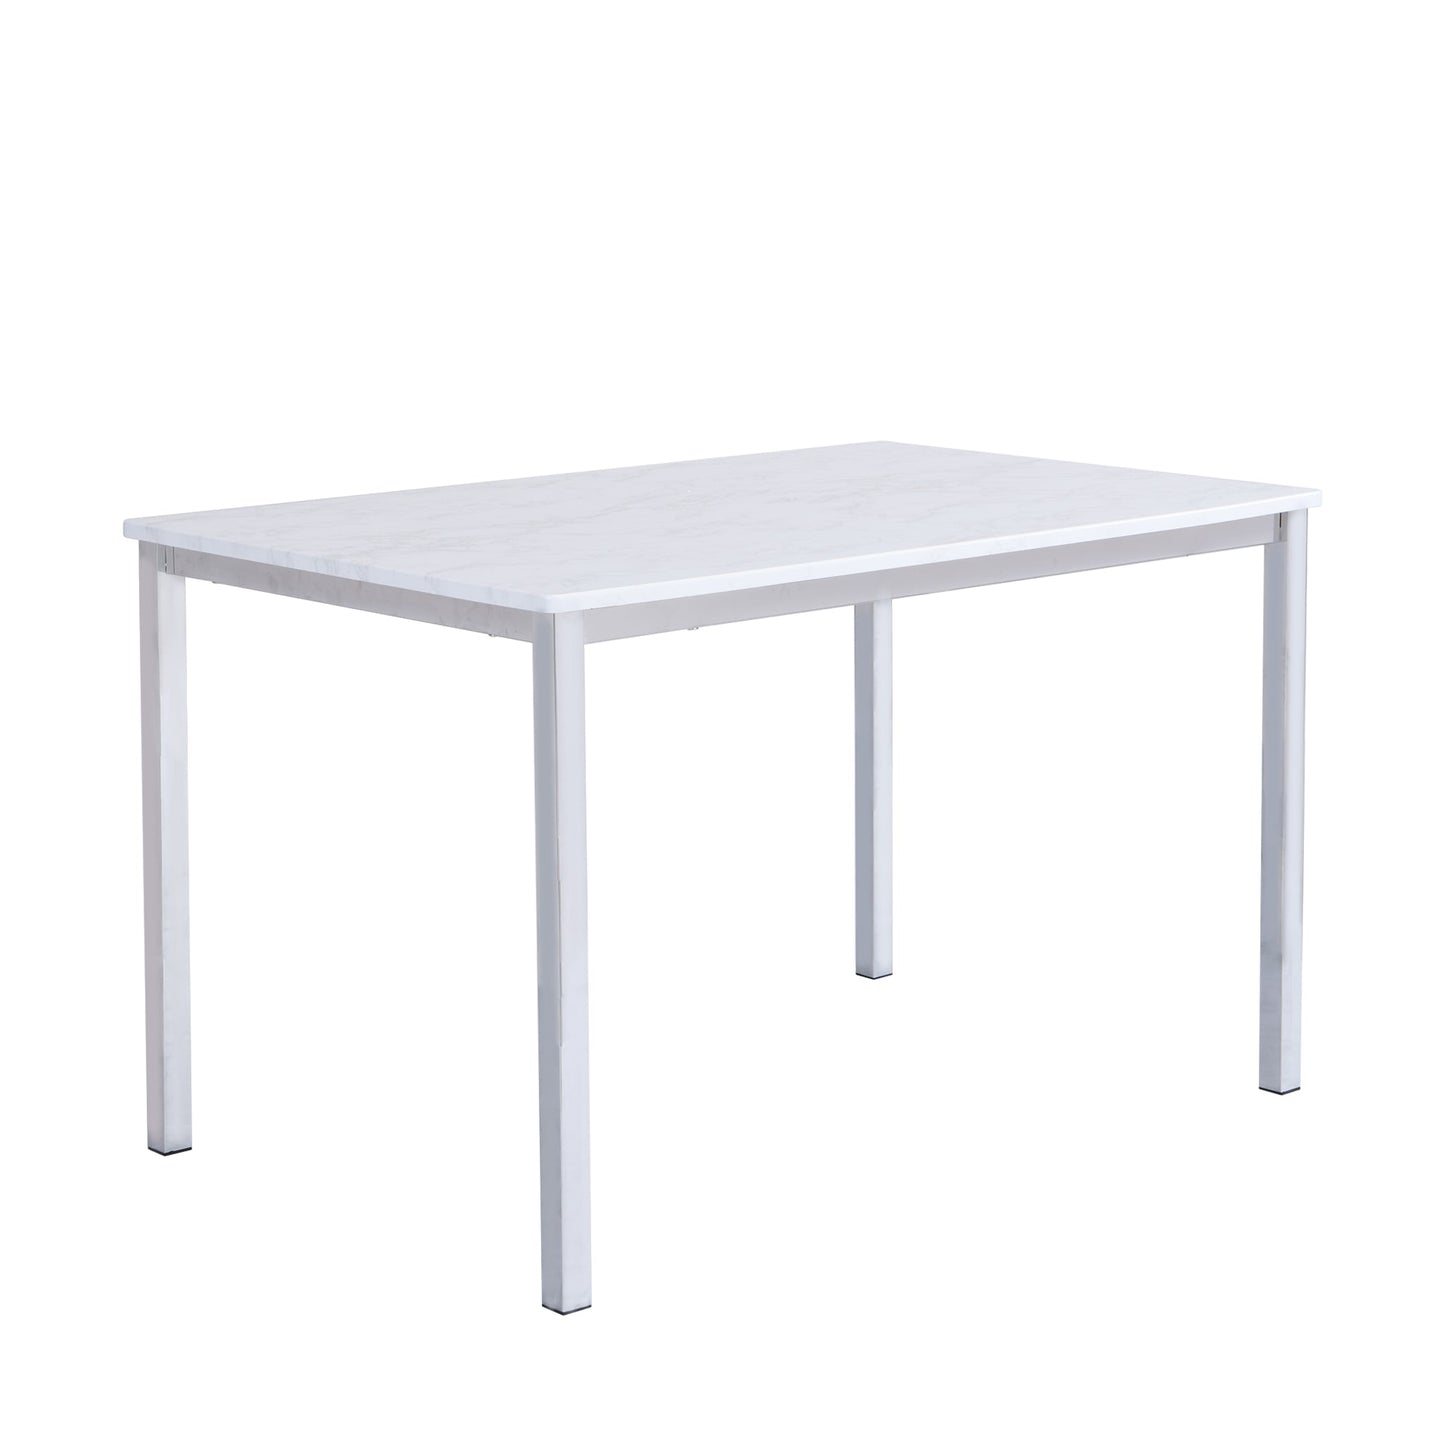 Milo dining table - 6 seater - marble effect and chrome - Laura James